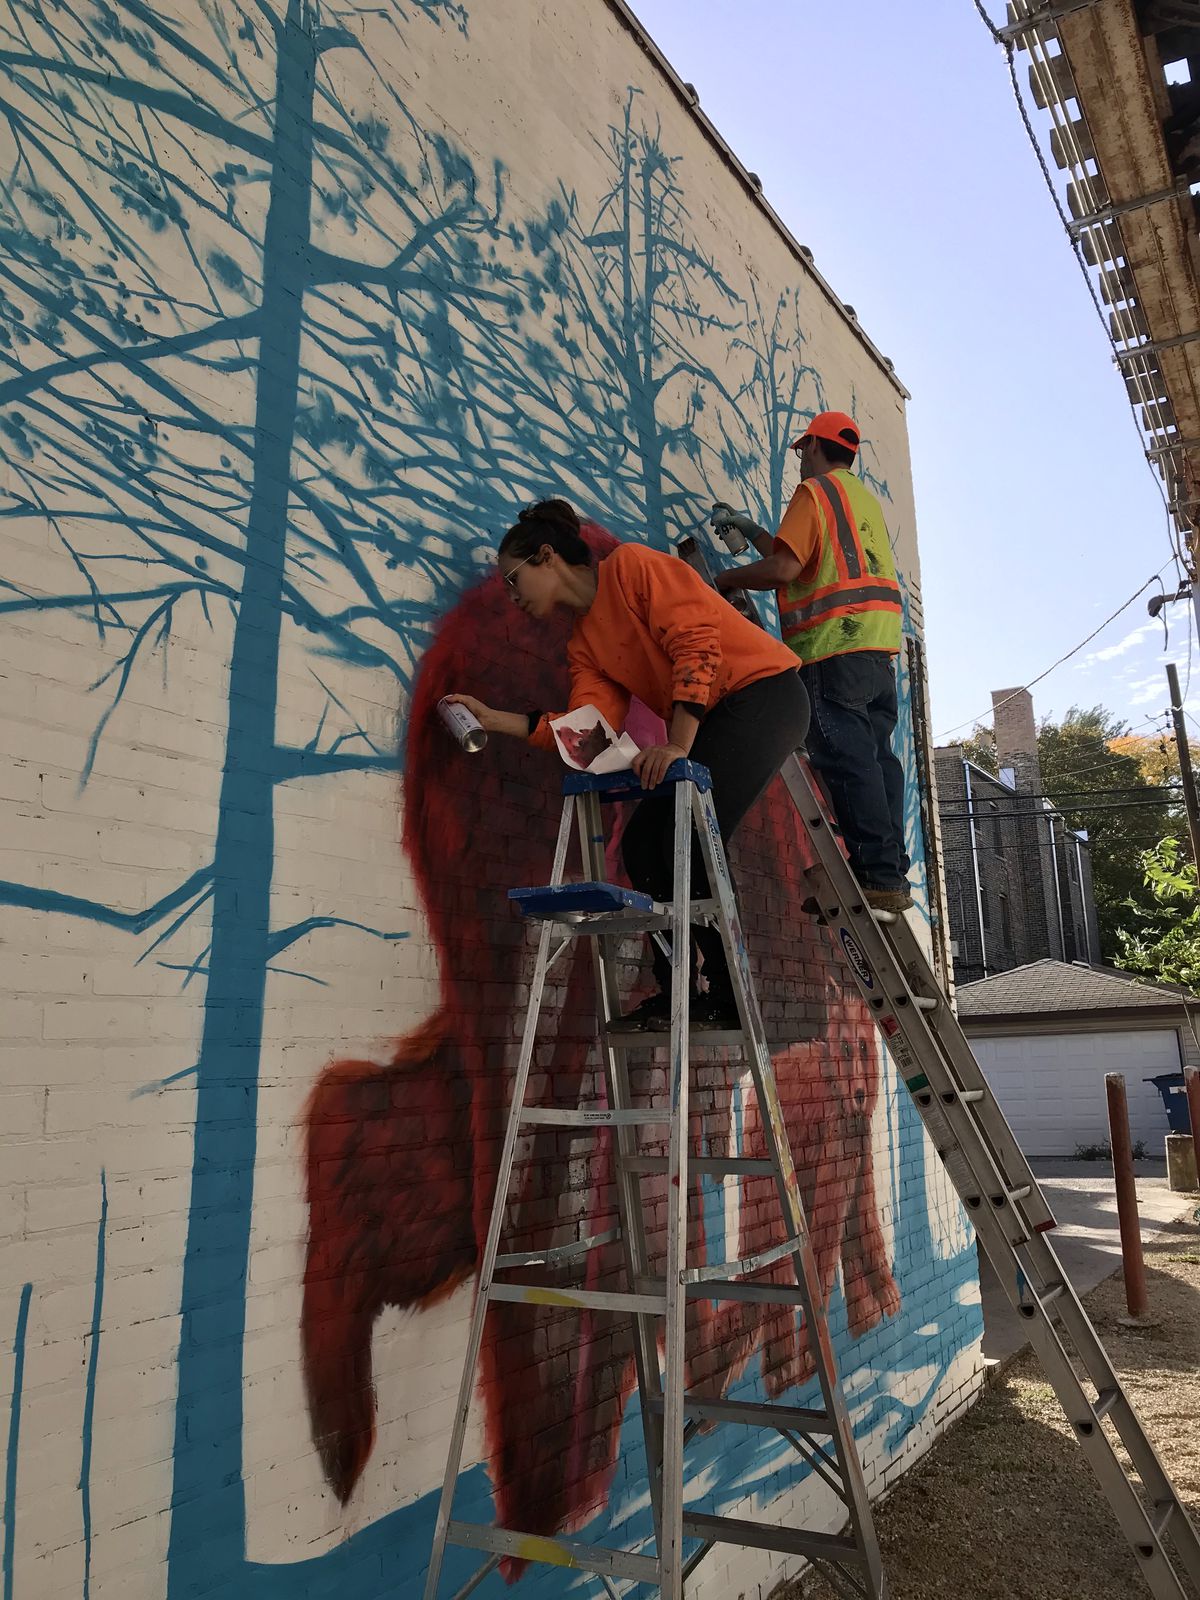 Felix Maldonado Jr. and his assistant Lisa Jones work to paint one of the bears in the mural.